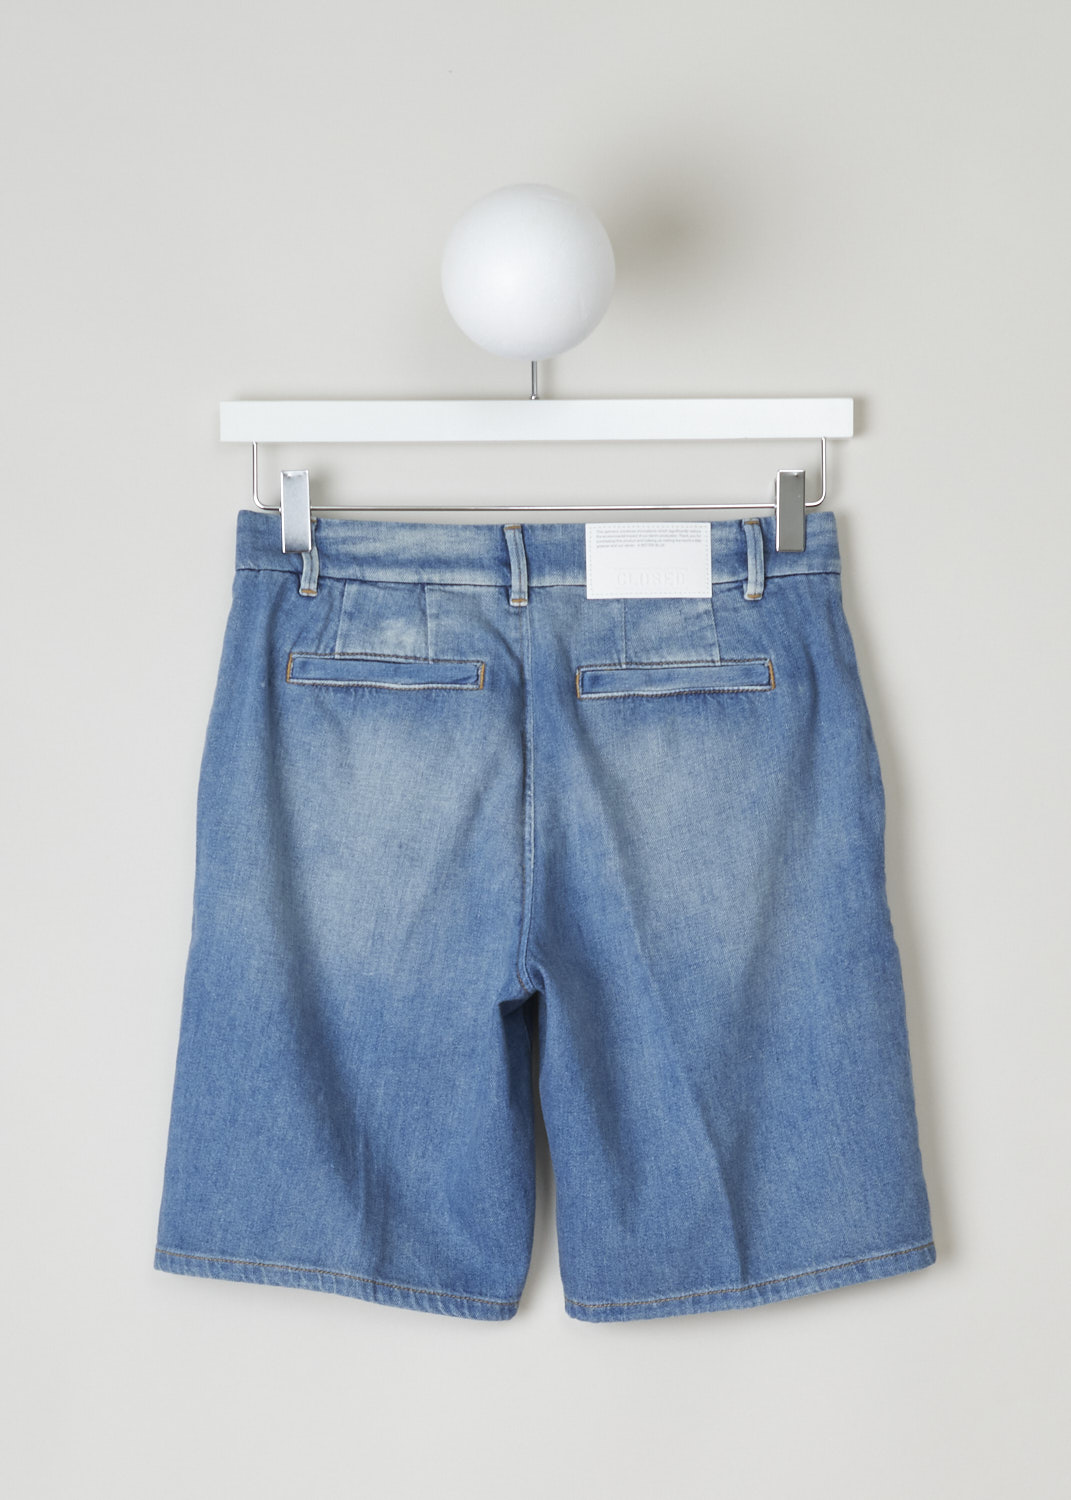 Closed, Jeans shorts, C92244_19P_4E_MLB, blue, back, Brighten up your wardrobe with these jeans shorts. Made in the chino model, so it has forward slanted pockets on the front and two jetted pockets on the back. The closure option here comes in the from of zipper and a regular button. 